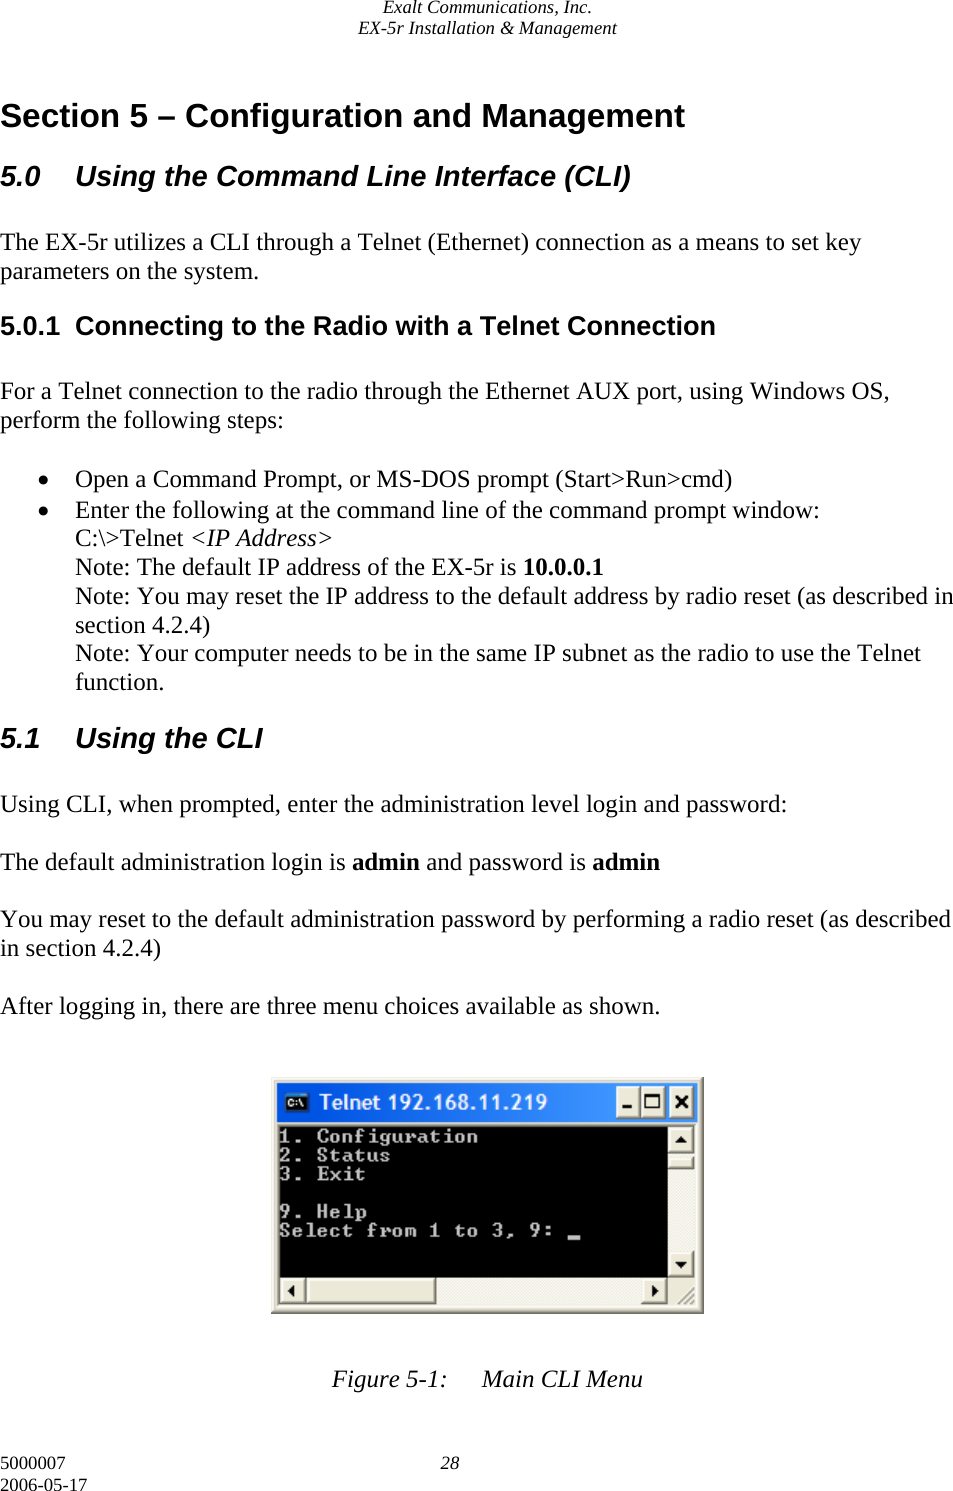 Exalt Communications, Inc. EX-5r Installation &amp; Management 5000007  28 2006-05-17 Section 5 – Configuration and Management 5.0  Using the Command Line Interface (CLI)  The EX-5r utilizes a CLI through a Telnet (Ethernet) connection as a means to set key parameters on the system.  5.0.1  Connecting to the Radio with a Telnet Connection  For a Telnet connection to the radio through the Ethernet AUX port, using Windows OS, perform the following steps:  • Open a Command Prompt, or MS-DOS prompt (Start&gt;Run&gt;cmd) • Enter the following at the command line of the command prompt window: C:\&gt;Telnet &lt;IP Address&gt; Note: The default IP address of the EX-5r is 10.0.0.1 Note: You may reset the IP address to the default address by radio reset (as described in section 4.2.4) Note: Your computer needs to be in the same IP subnet as the radio to use the Telnet function. 5.1  Using the CLI  Using CLI, when prompted, enter the administration level login and password:  The default administration login is admin and password is admin  You may reset to the default administration password by performing a radio reset (as described in section 4.2.4)  After logging in, there are three menu choices available as shown.             Figure 5-1:  Main CLI Menu 